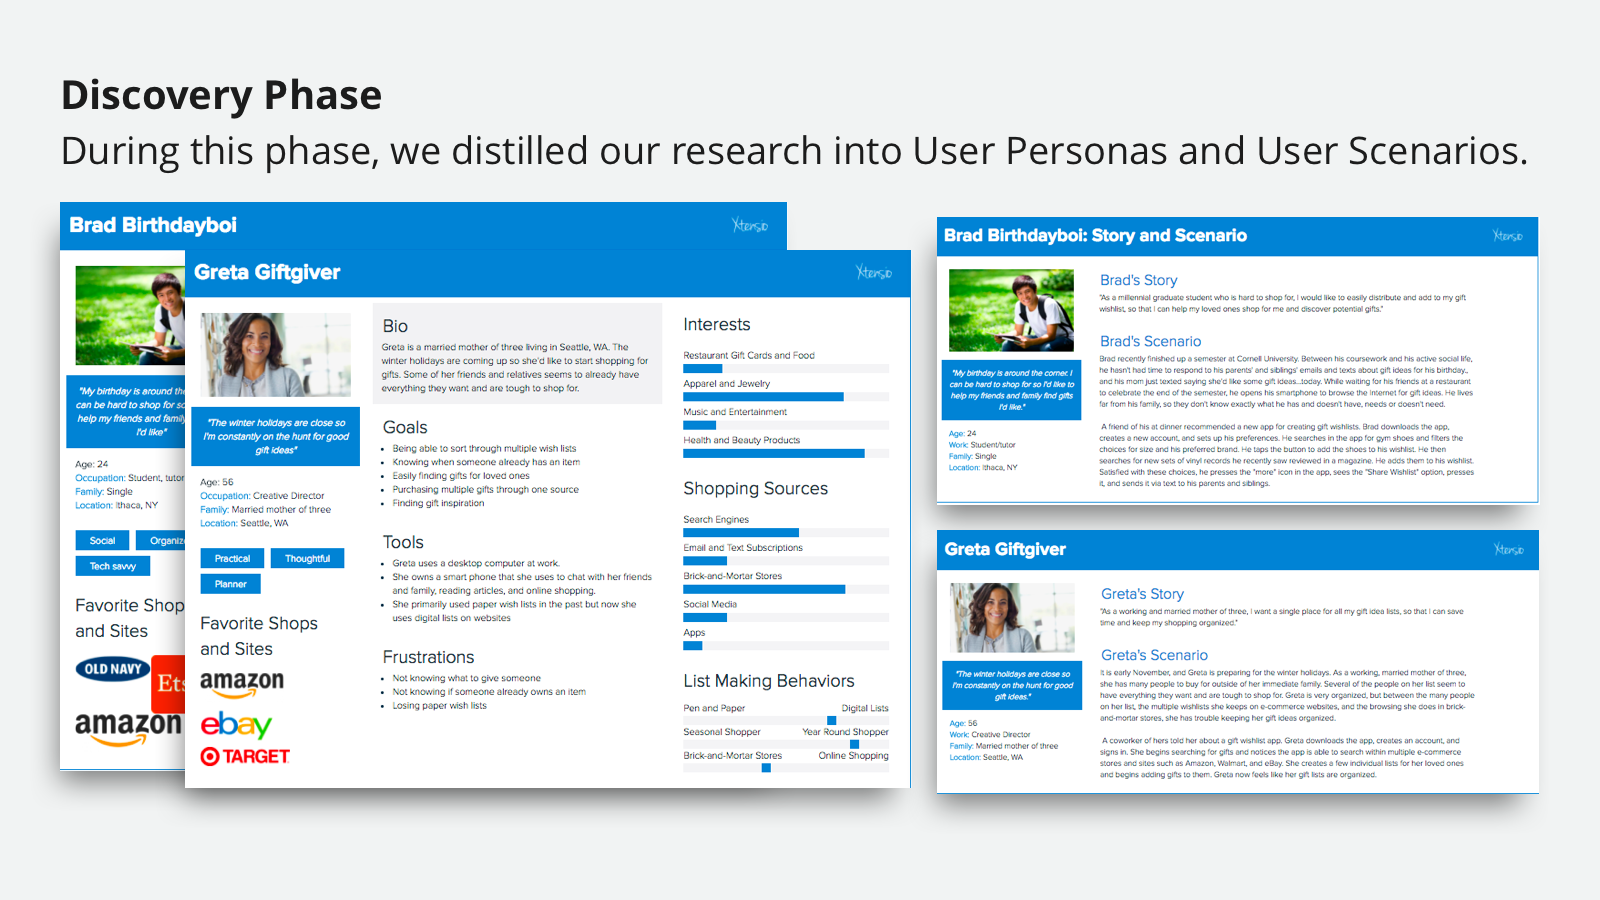 Discovery Phase: During this phase, we distilled our research into User Personas and User Scenarios.